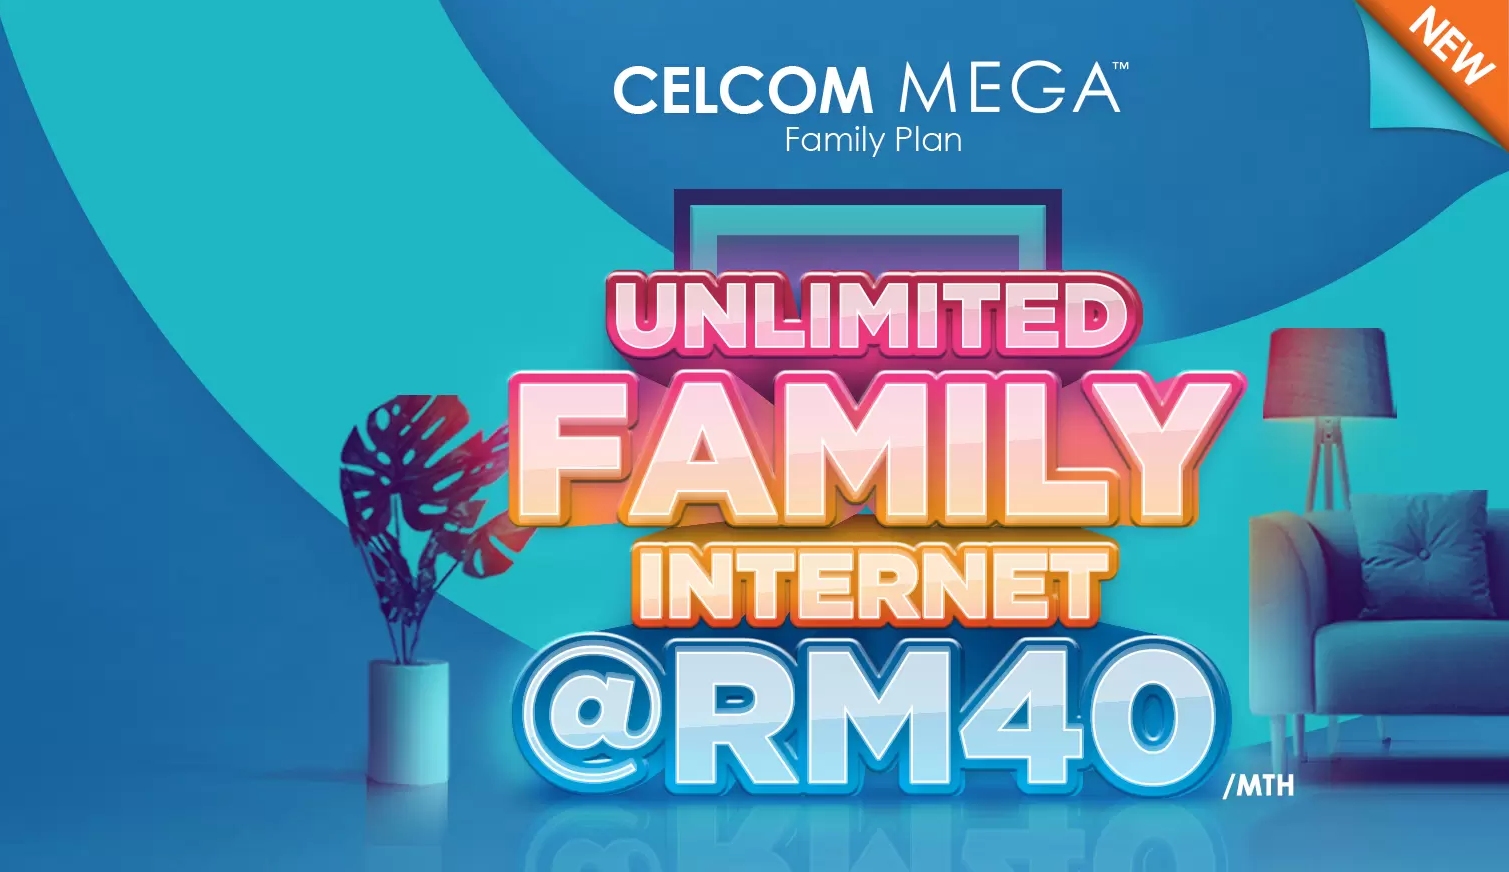 Celcom Mega Now Lets You Add Up To 6 Unlimited Family Lines At Rm40 Month Per Line Soyacincau